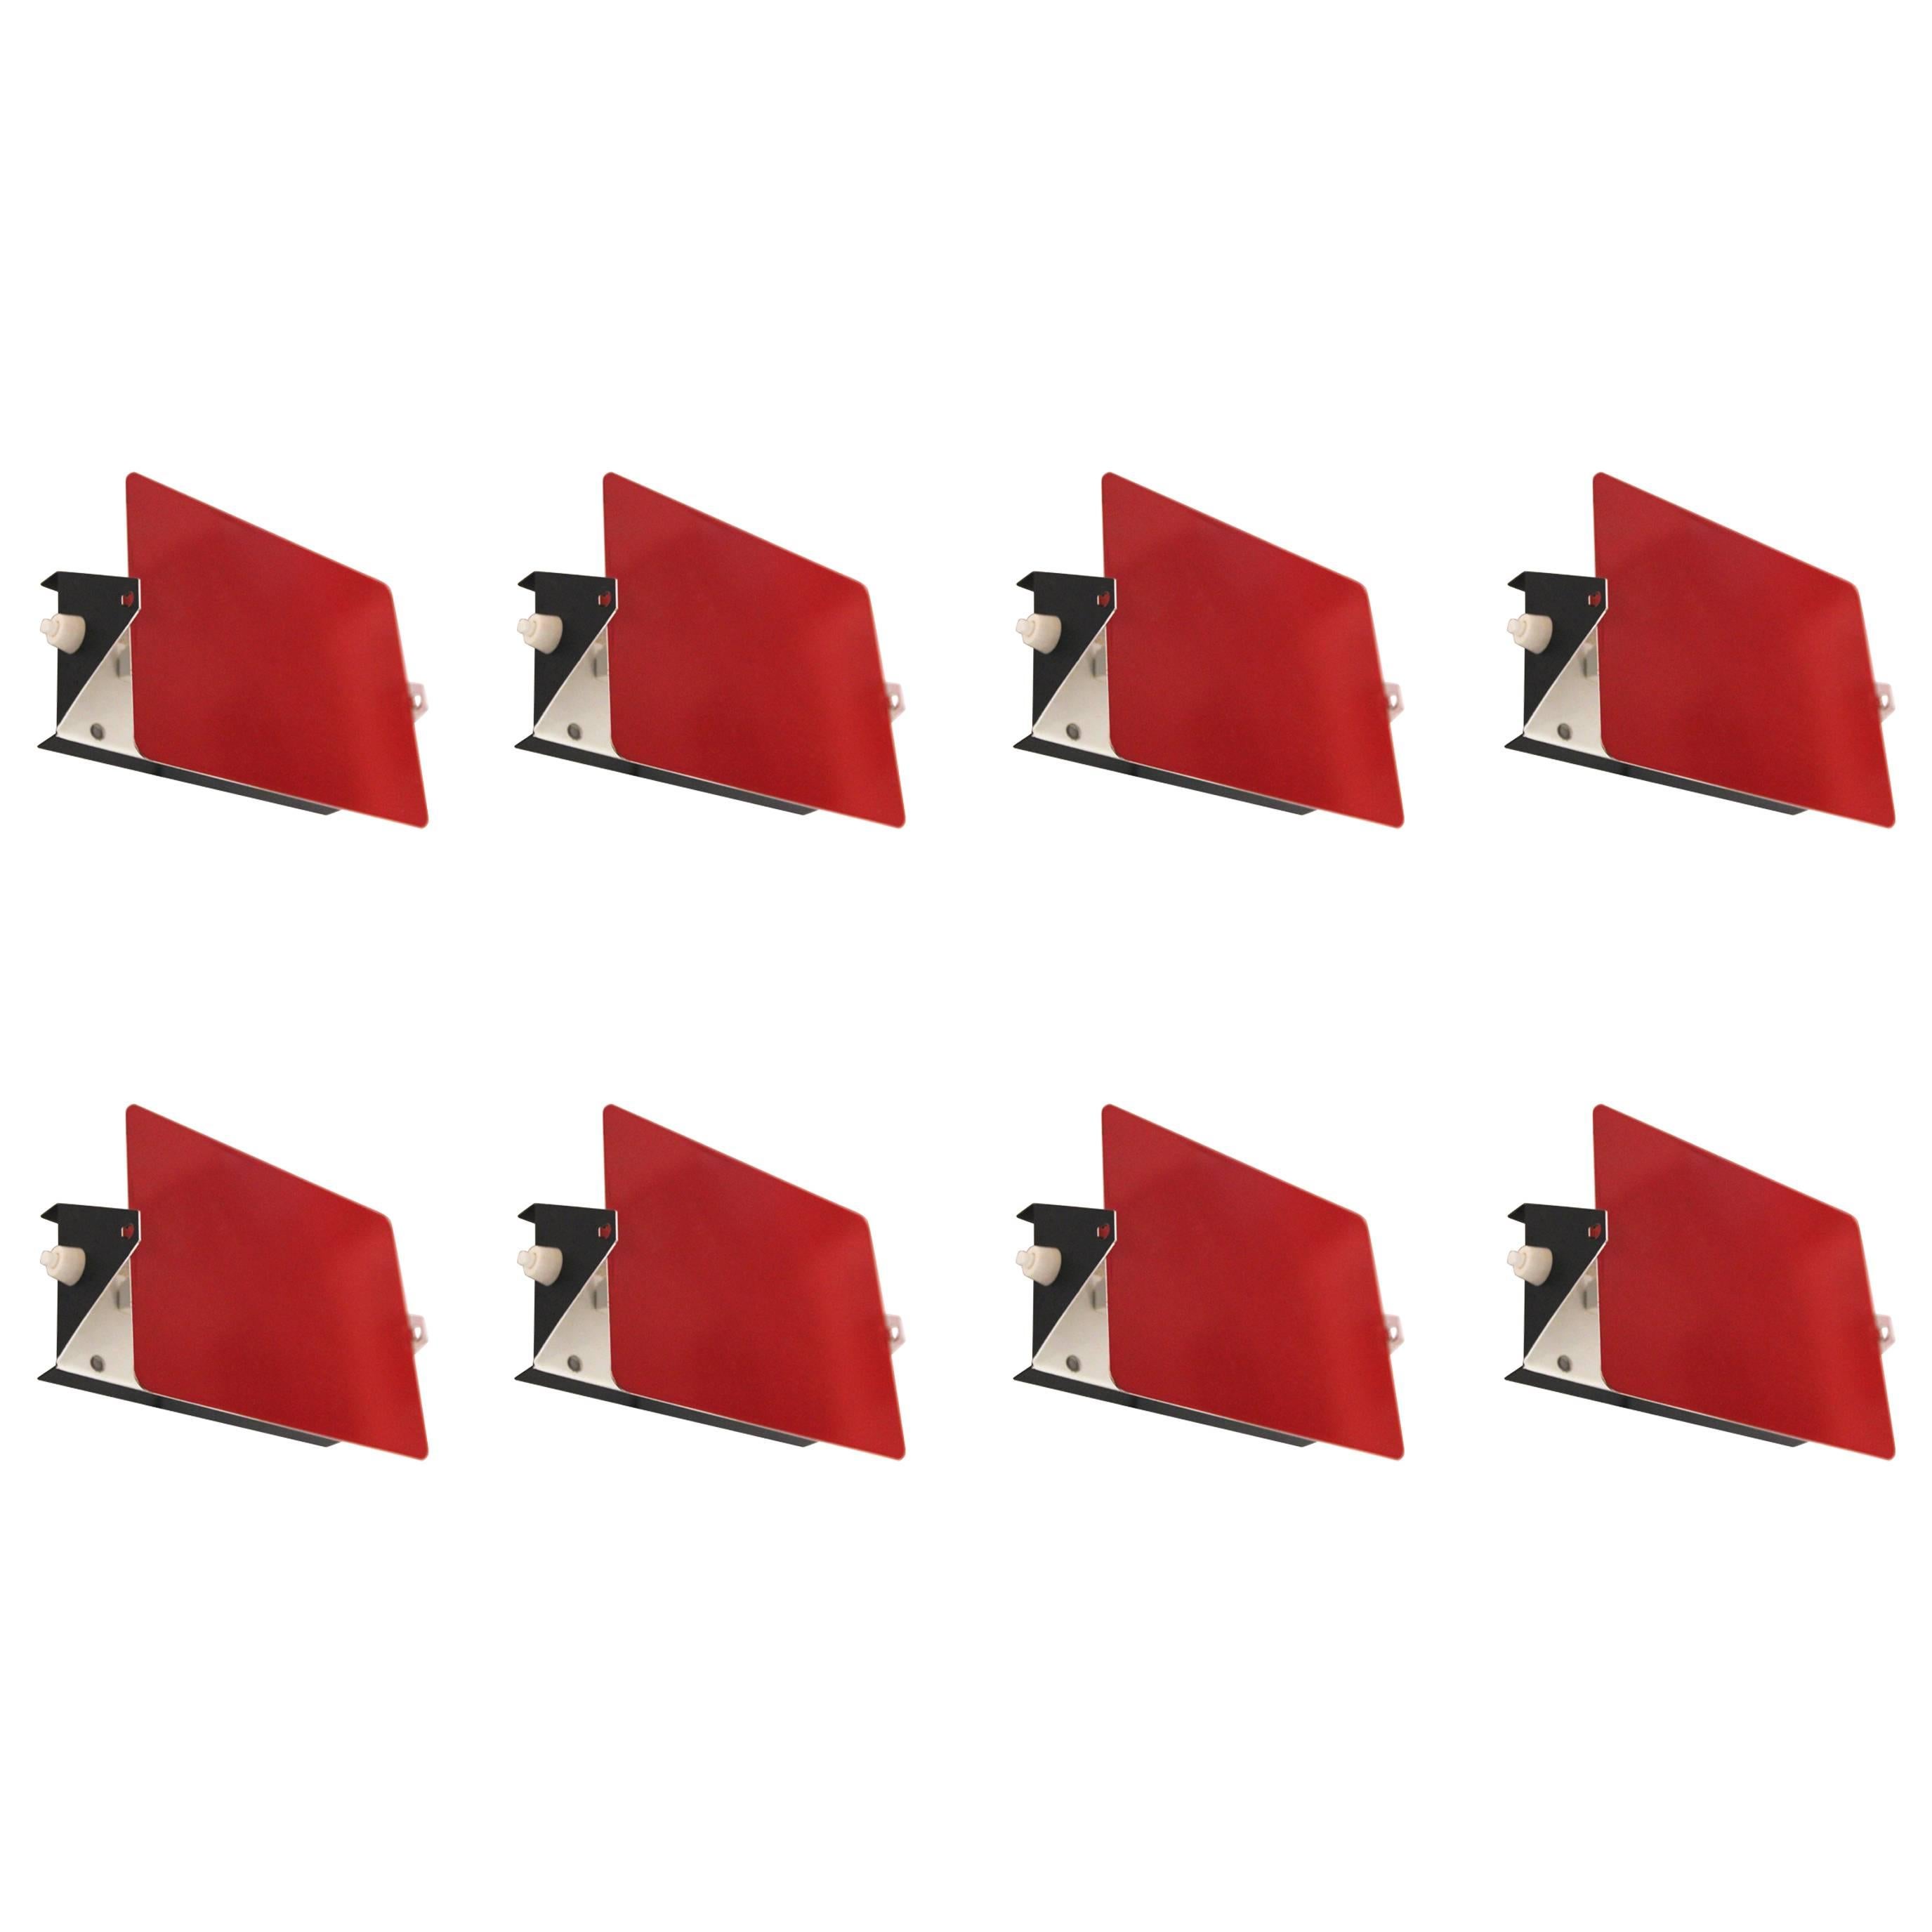 Charlotte Perriand, Suite of Eight Red Sconces, Model "CP1", circa 1960, France